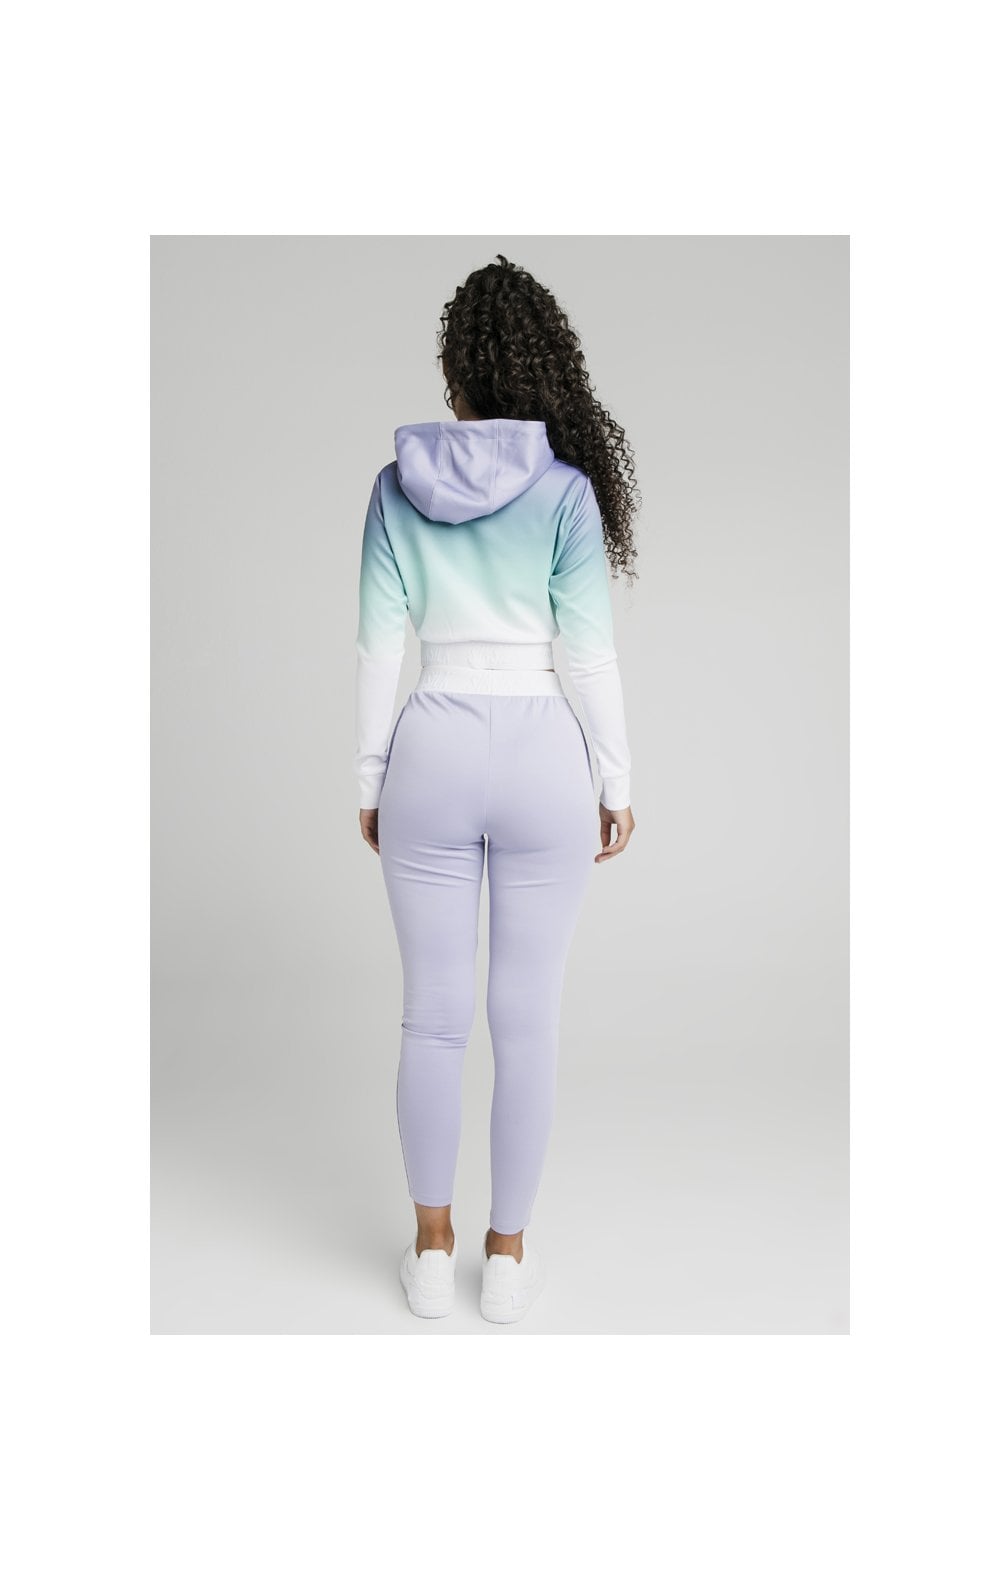 SikSilk Lilac Haze Track Top - Lilac
                    
                        Turquoise & White (5)